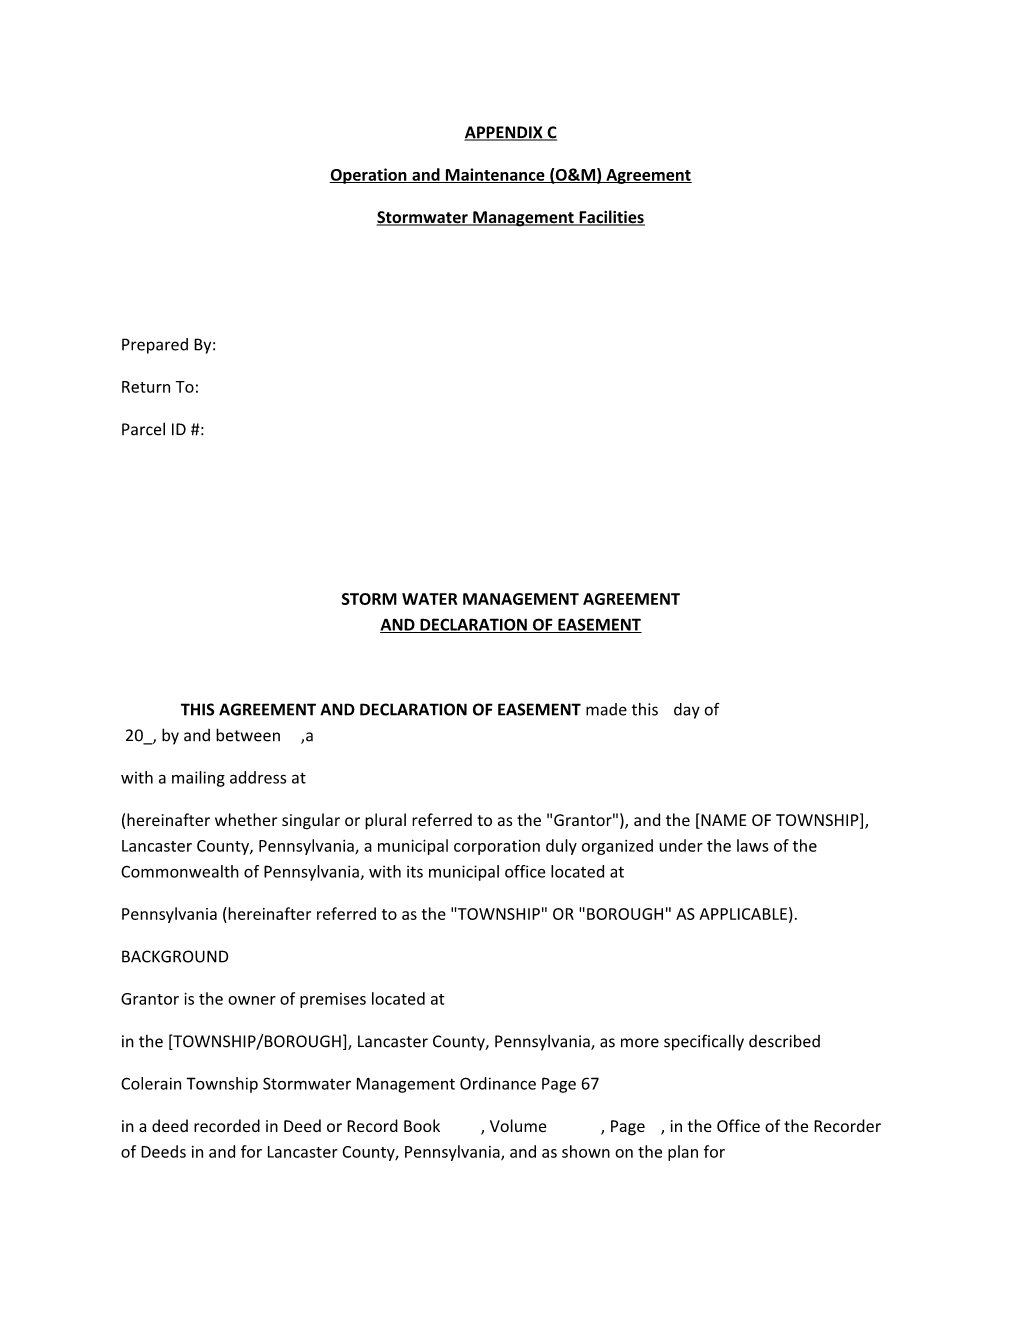 Operation and Maintenance (O&M) Agreement